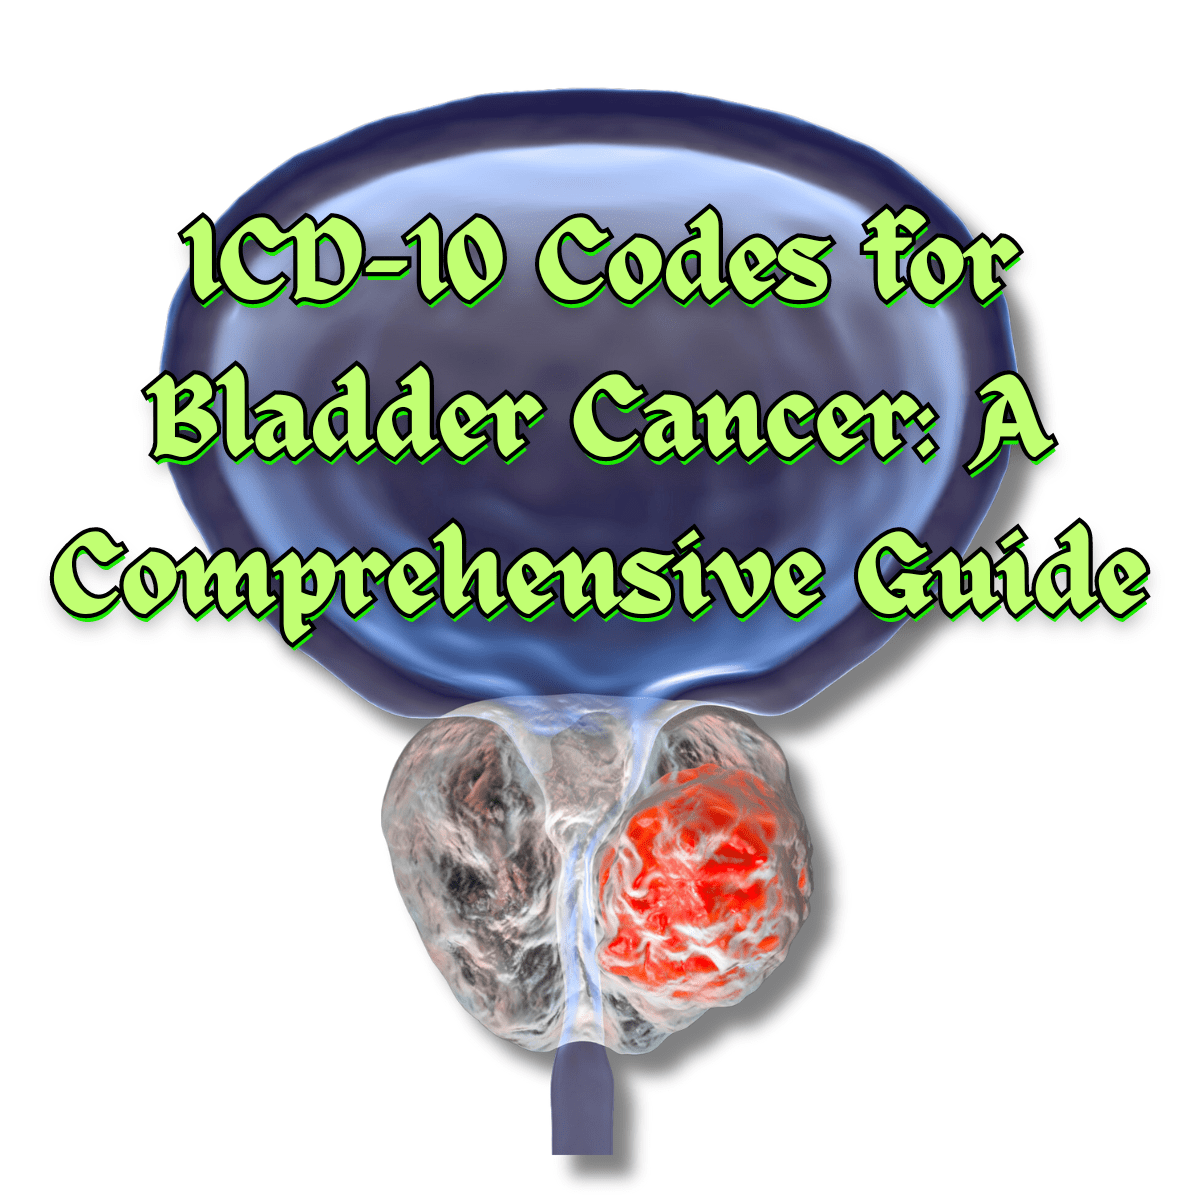 ICD-10 Codes for Bladder Cancer: A Comprehensive Guide